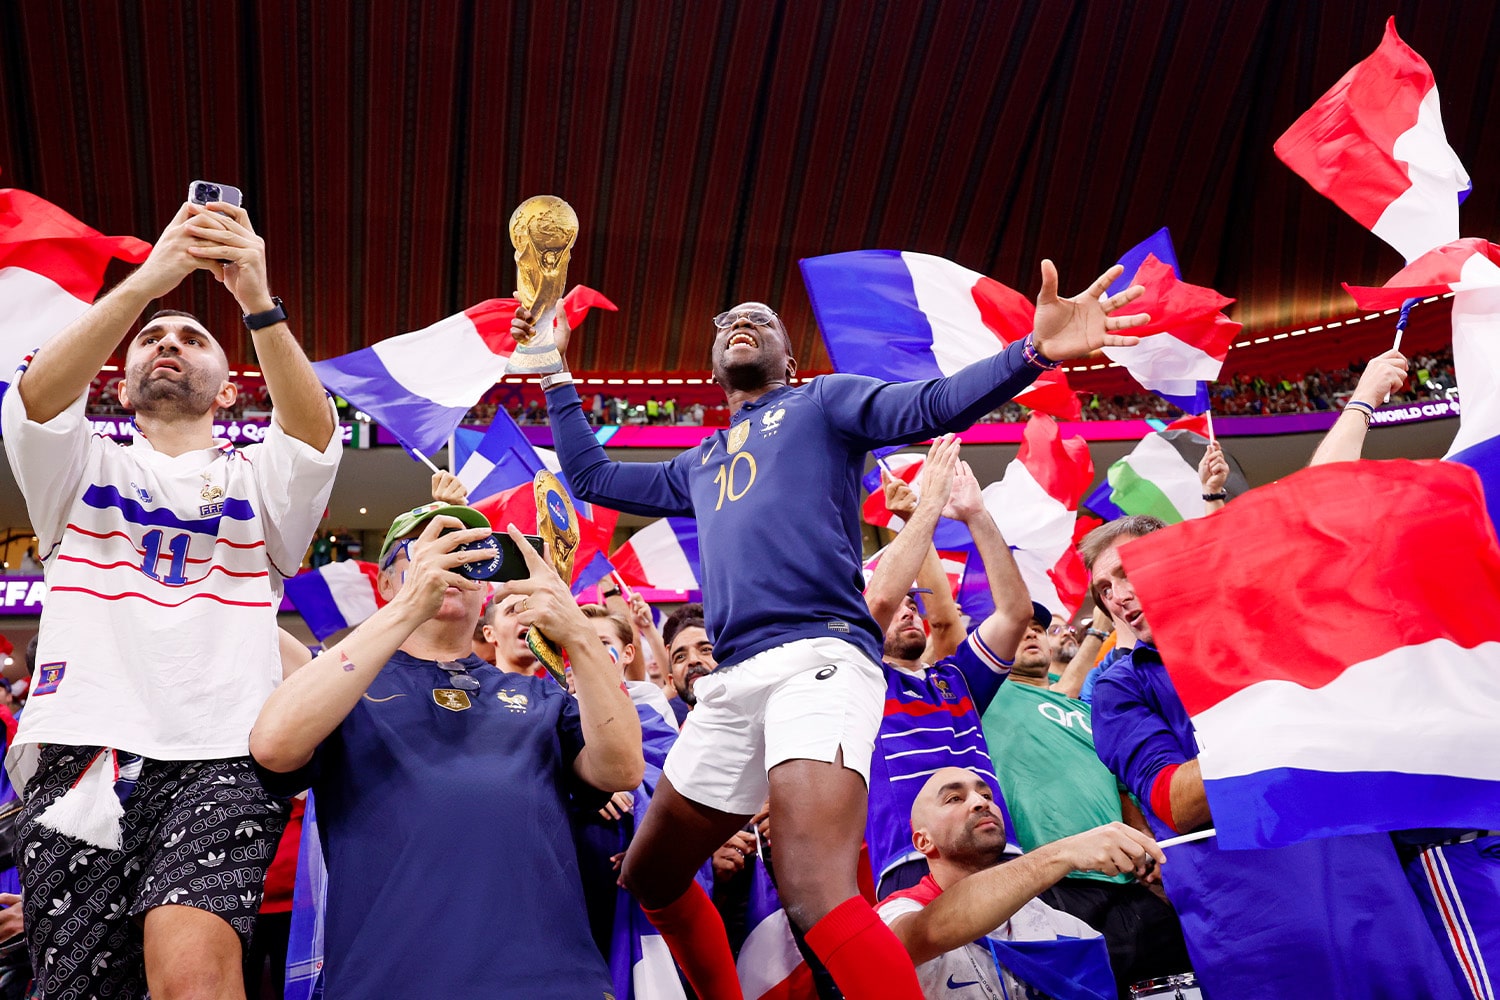 French fans cheering in the stands at the World Cup